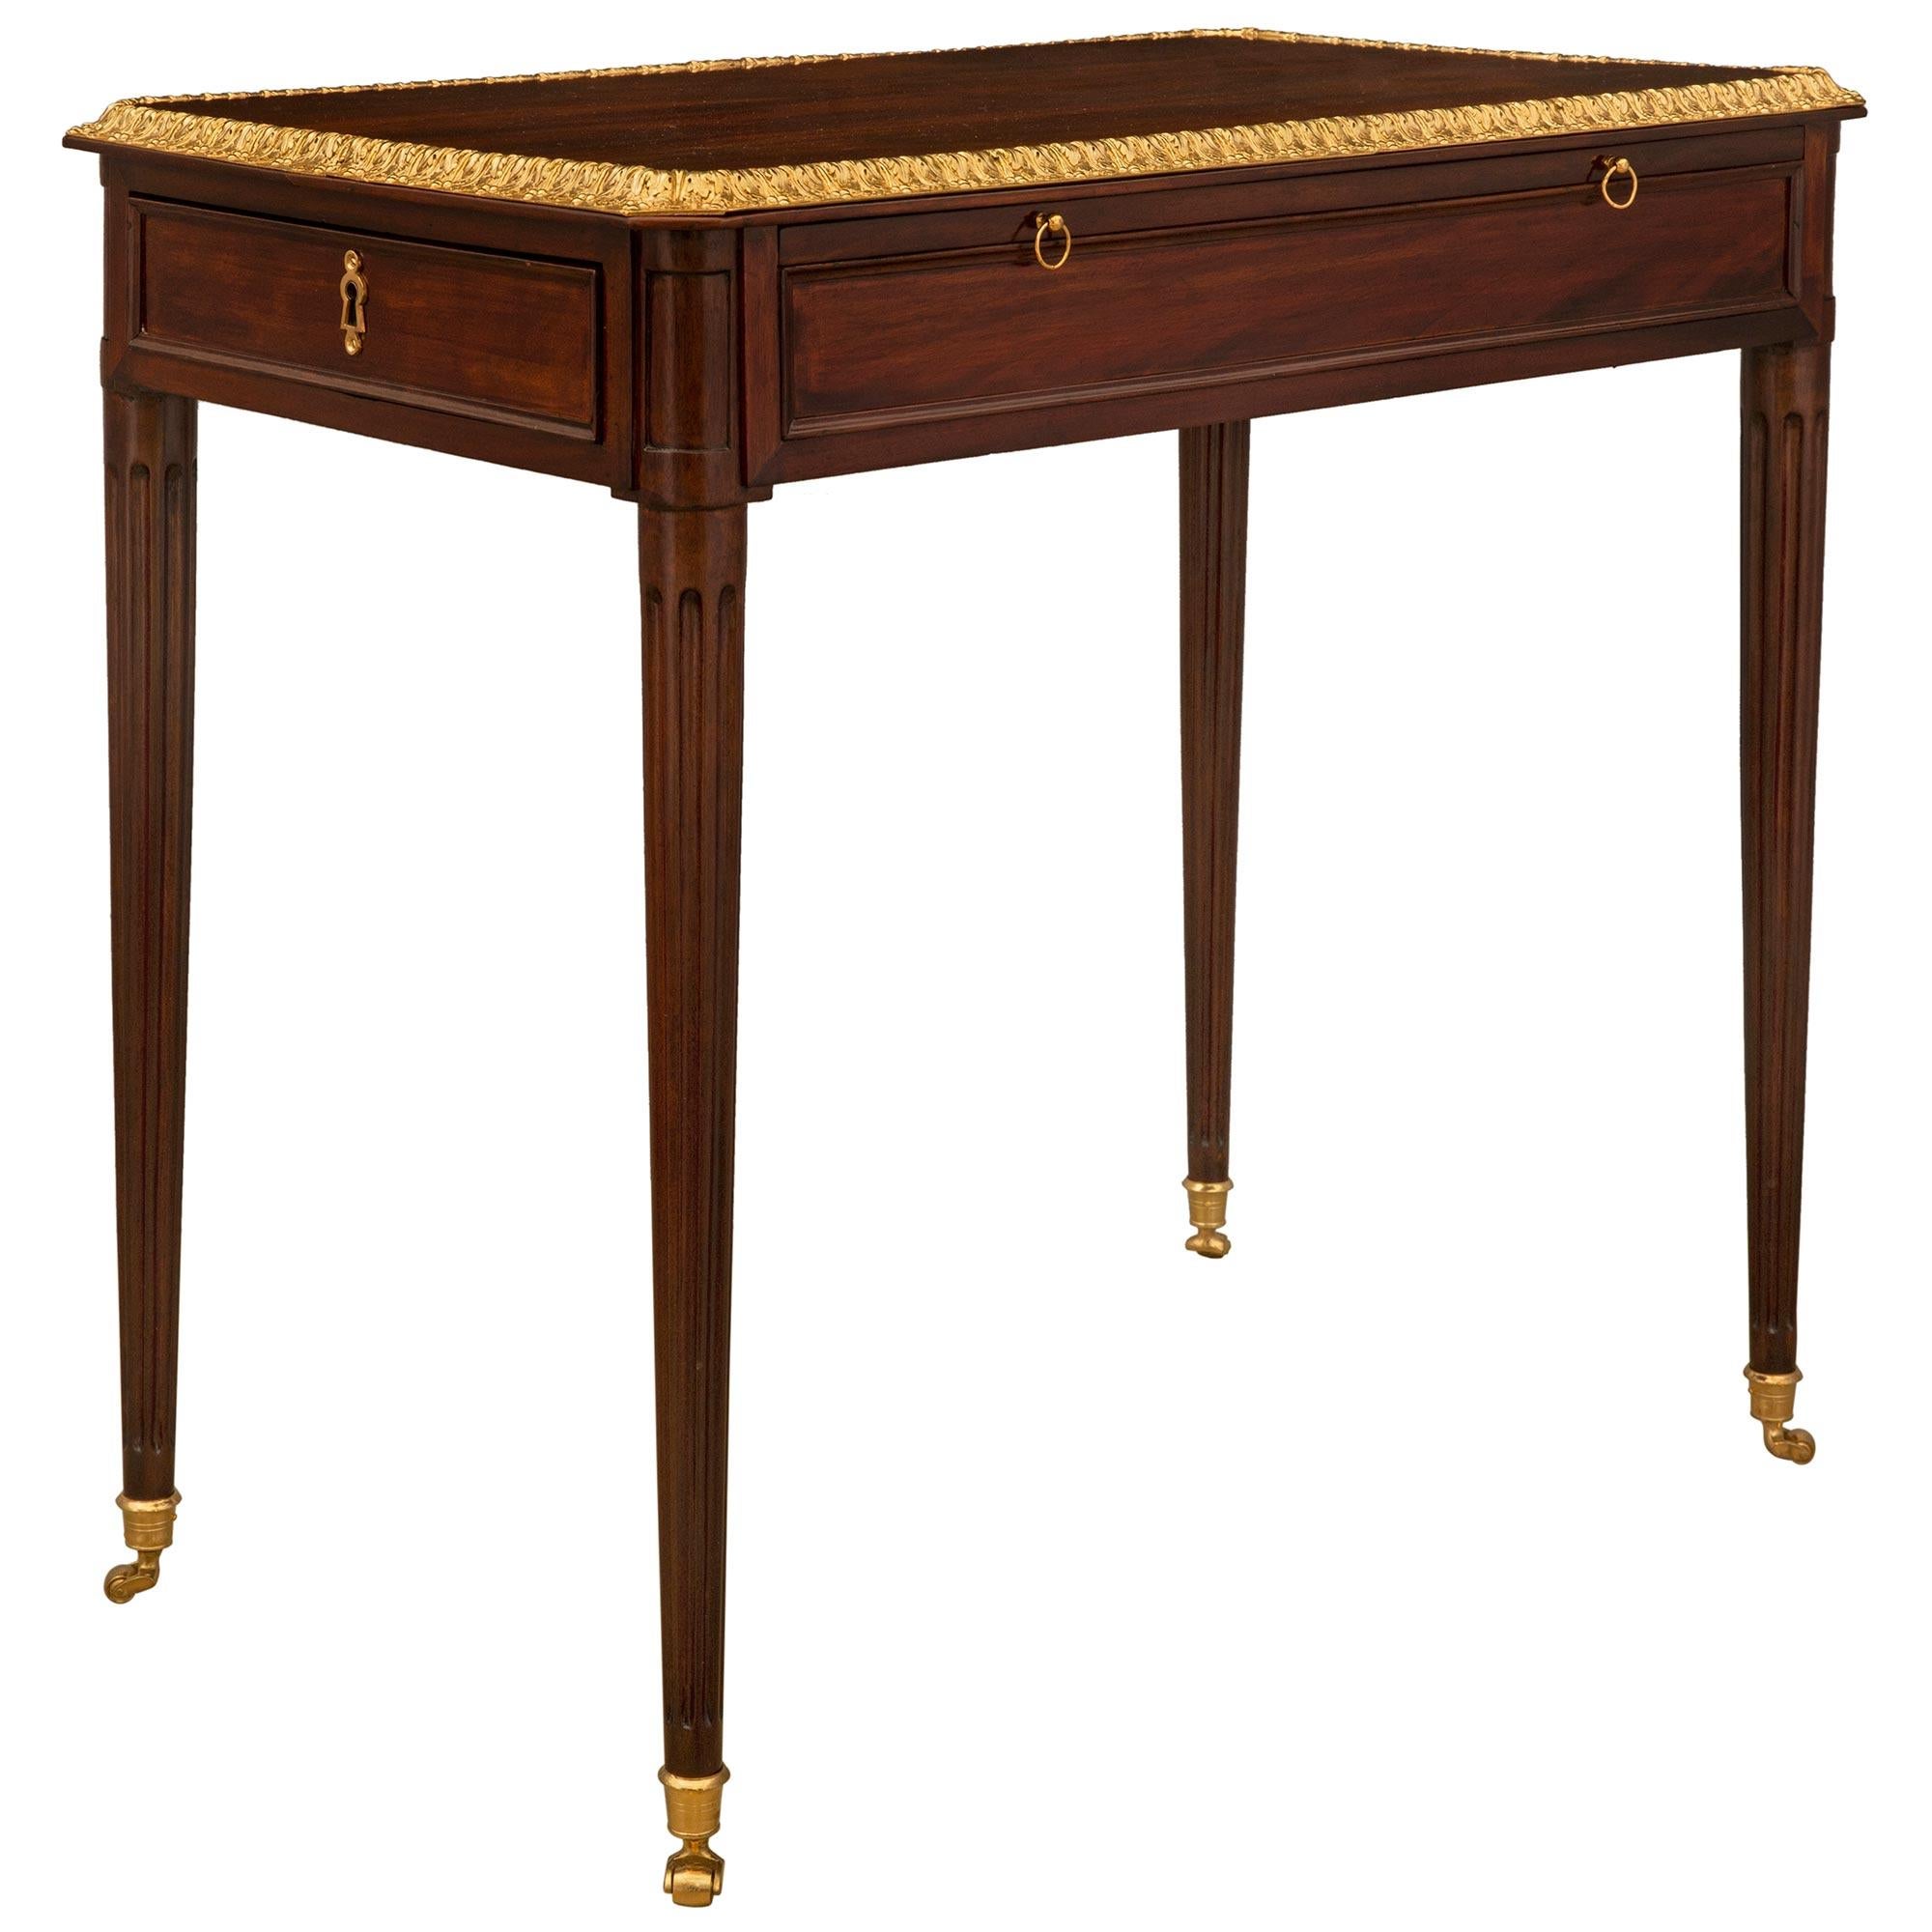 French 18th Century Louis XVI Period Mahogany and Ormolu Side Table / Desk In Good Condition For Sale In West Palm Beach, FL